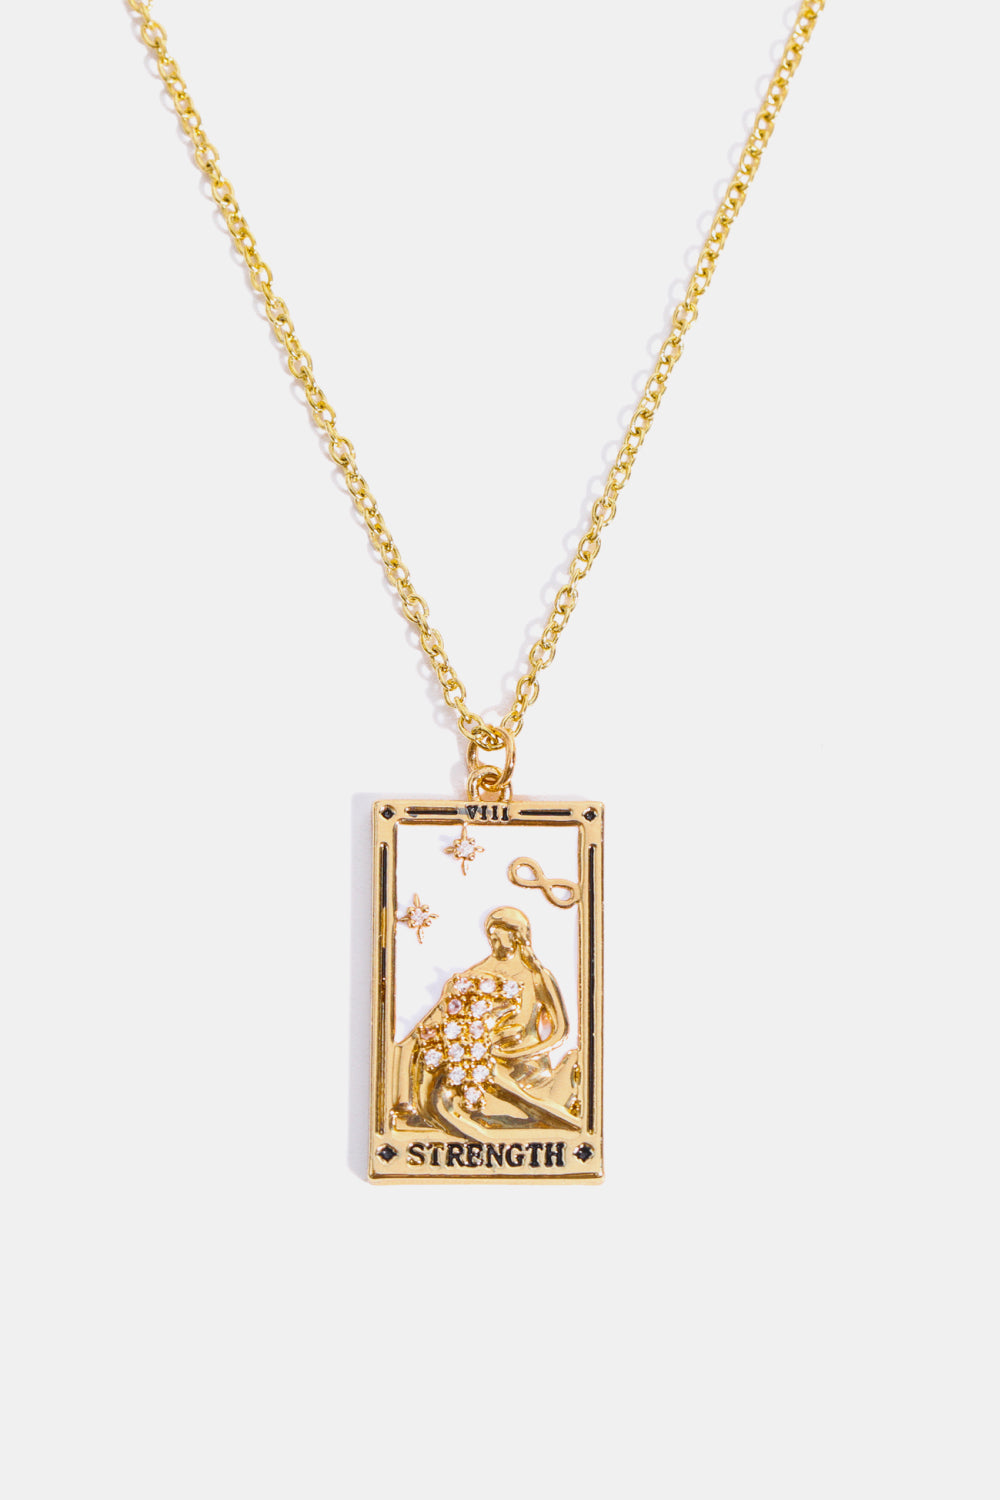 Trendsi Cupid Beauty Supplies STRENGTH Printed / One Size Women Necklace Tarot Card Pendant Stainless Steel Necklace